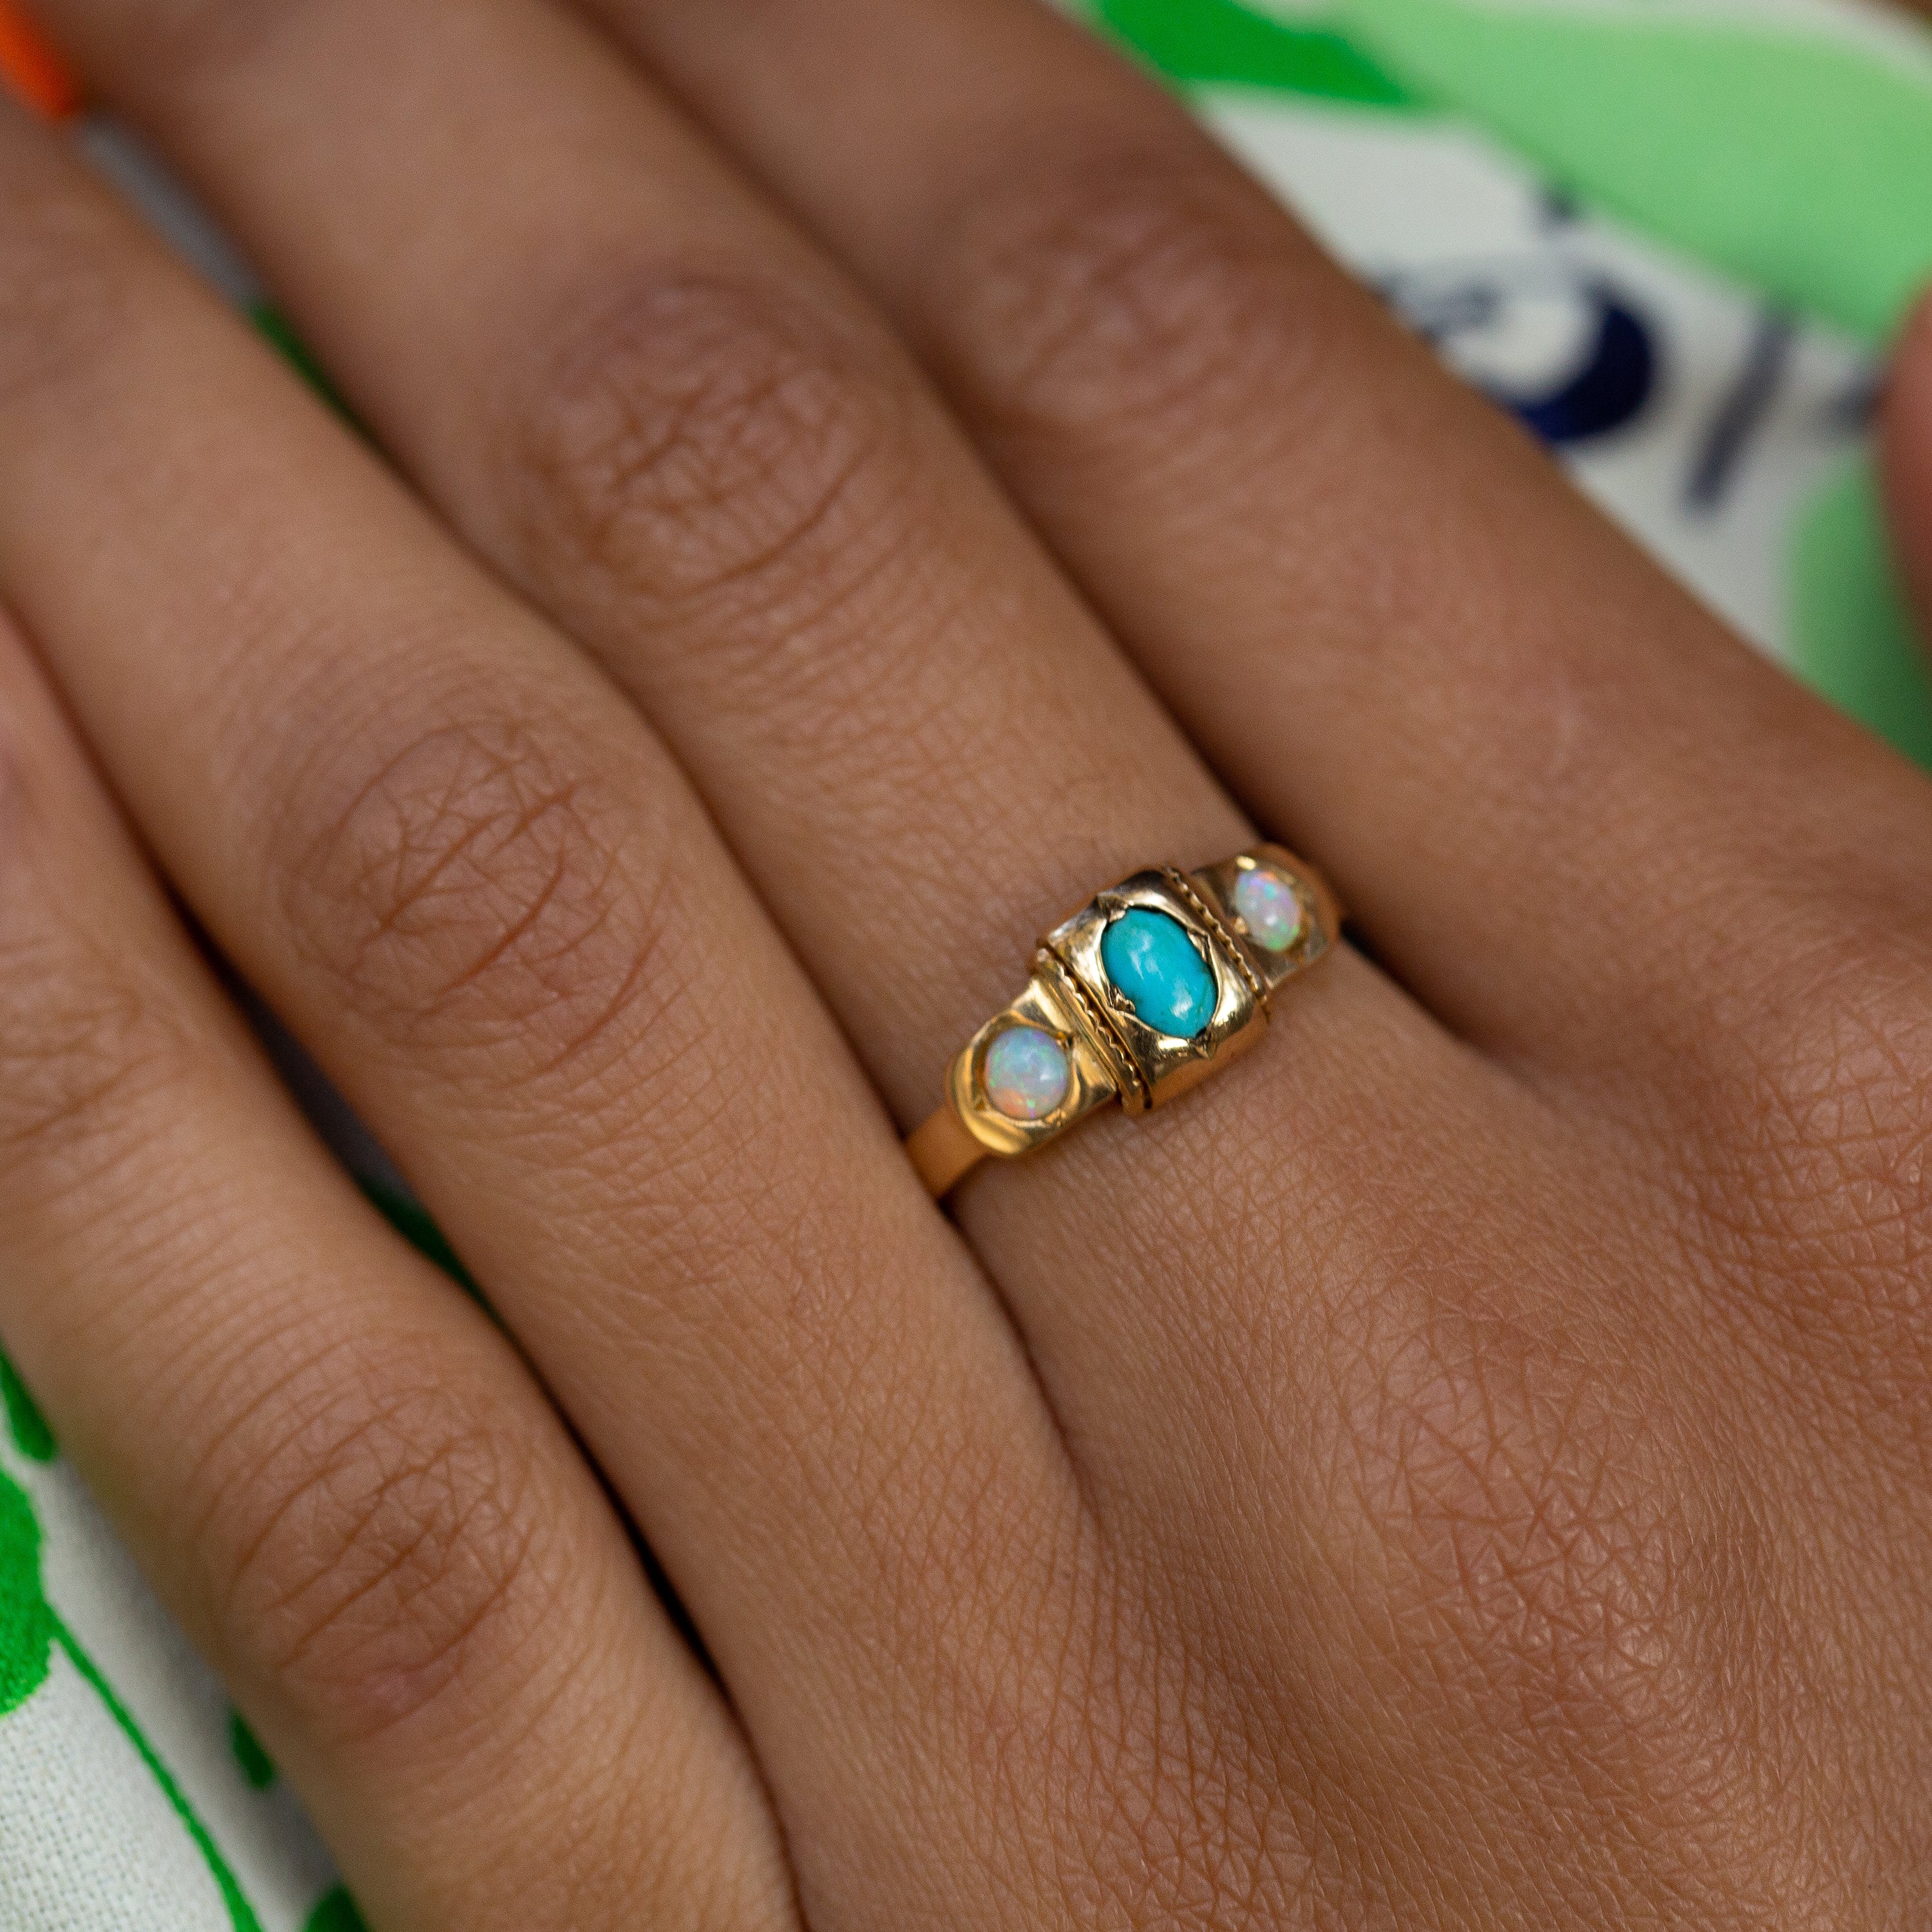 English Turquoise, Opal, and 18k Gold Gypsy Ring